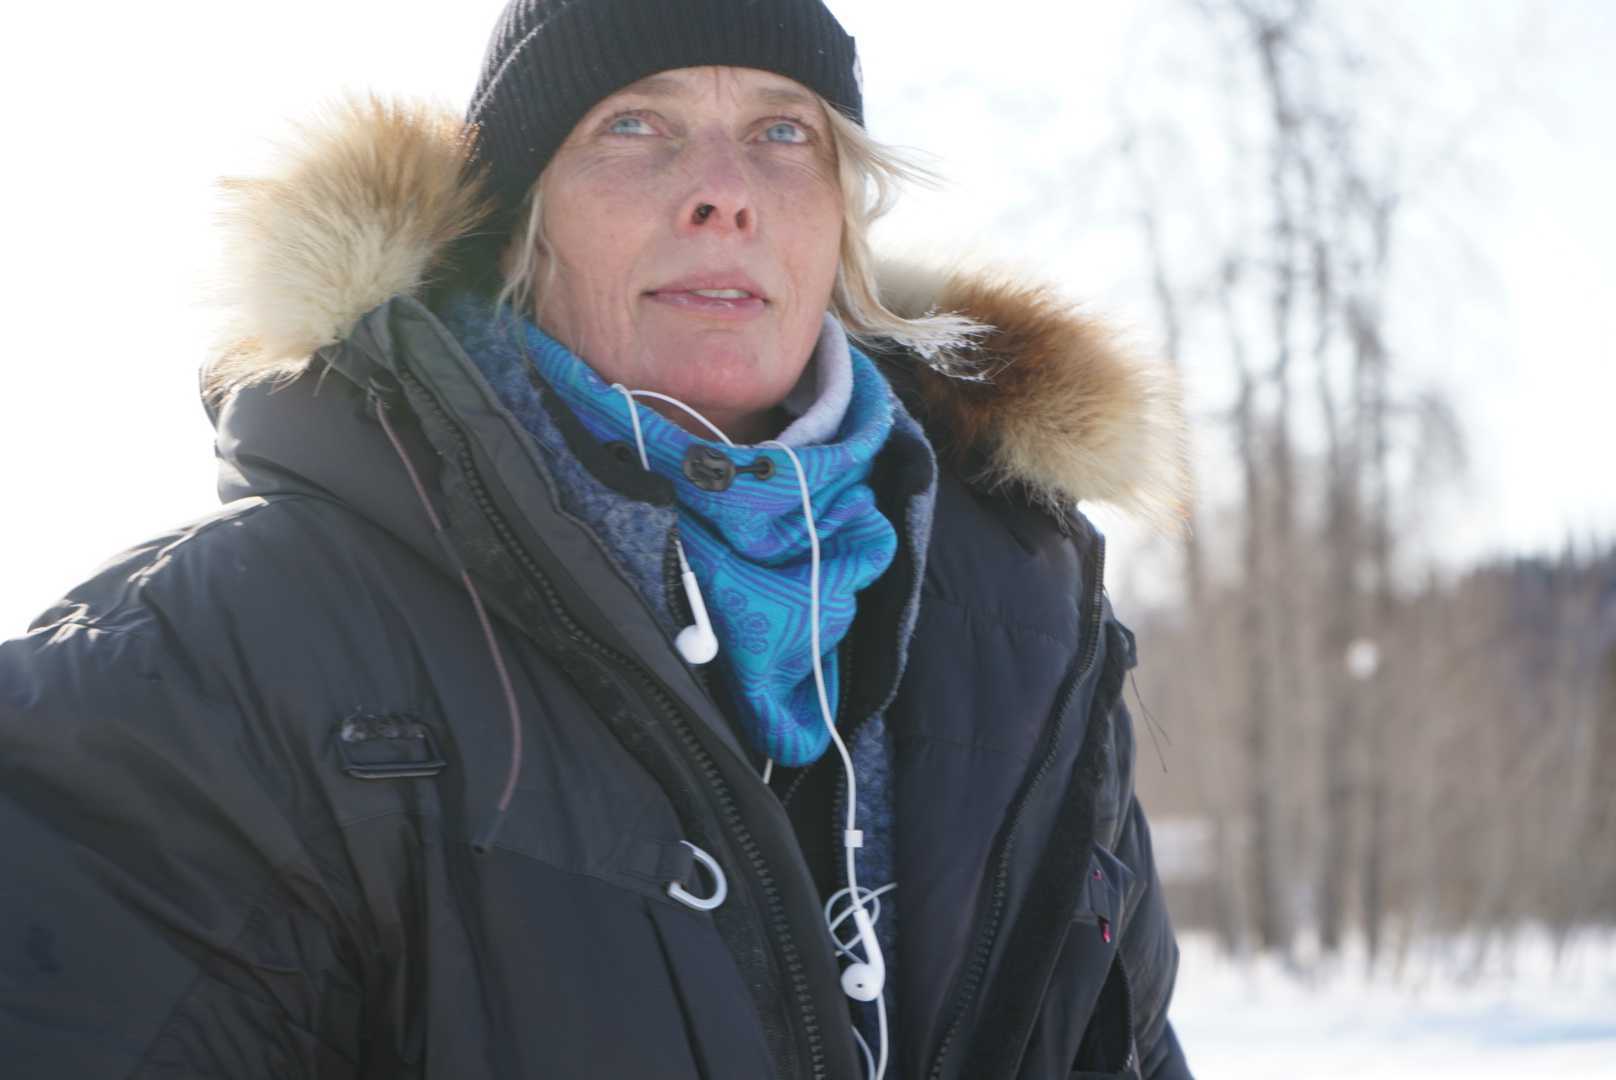 a woman in outdoor gear, with headphones hanging from her jacket